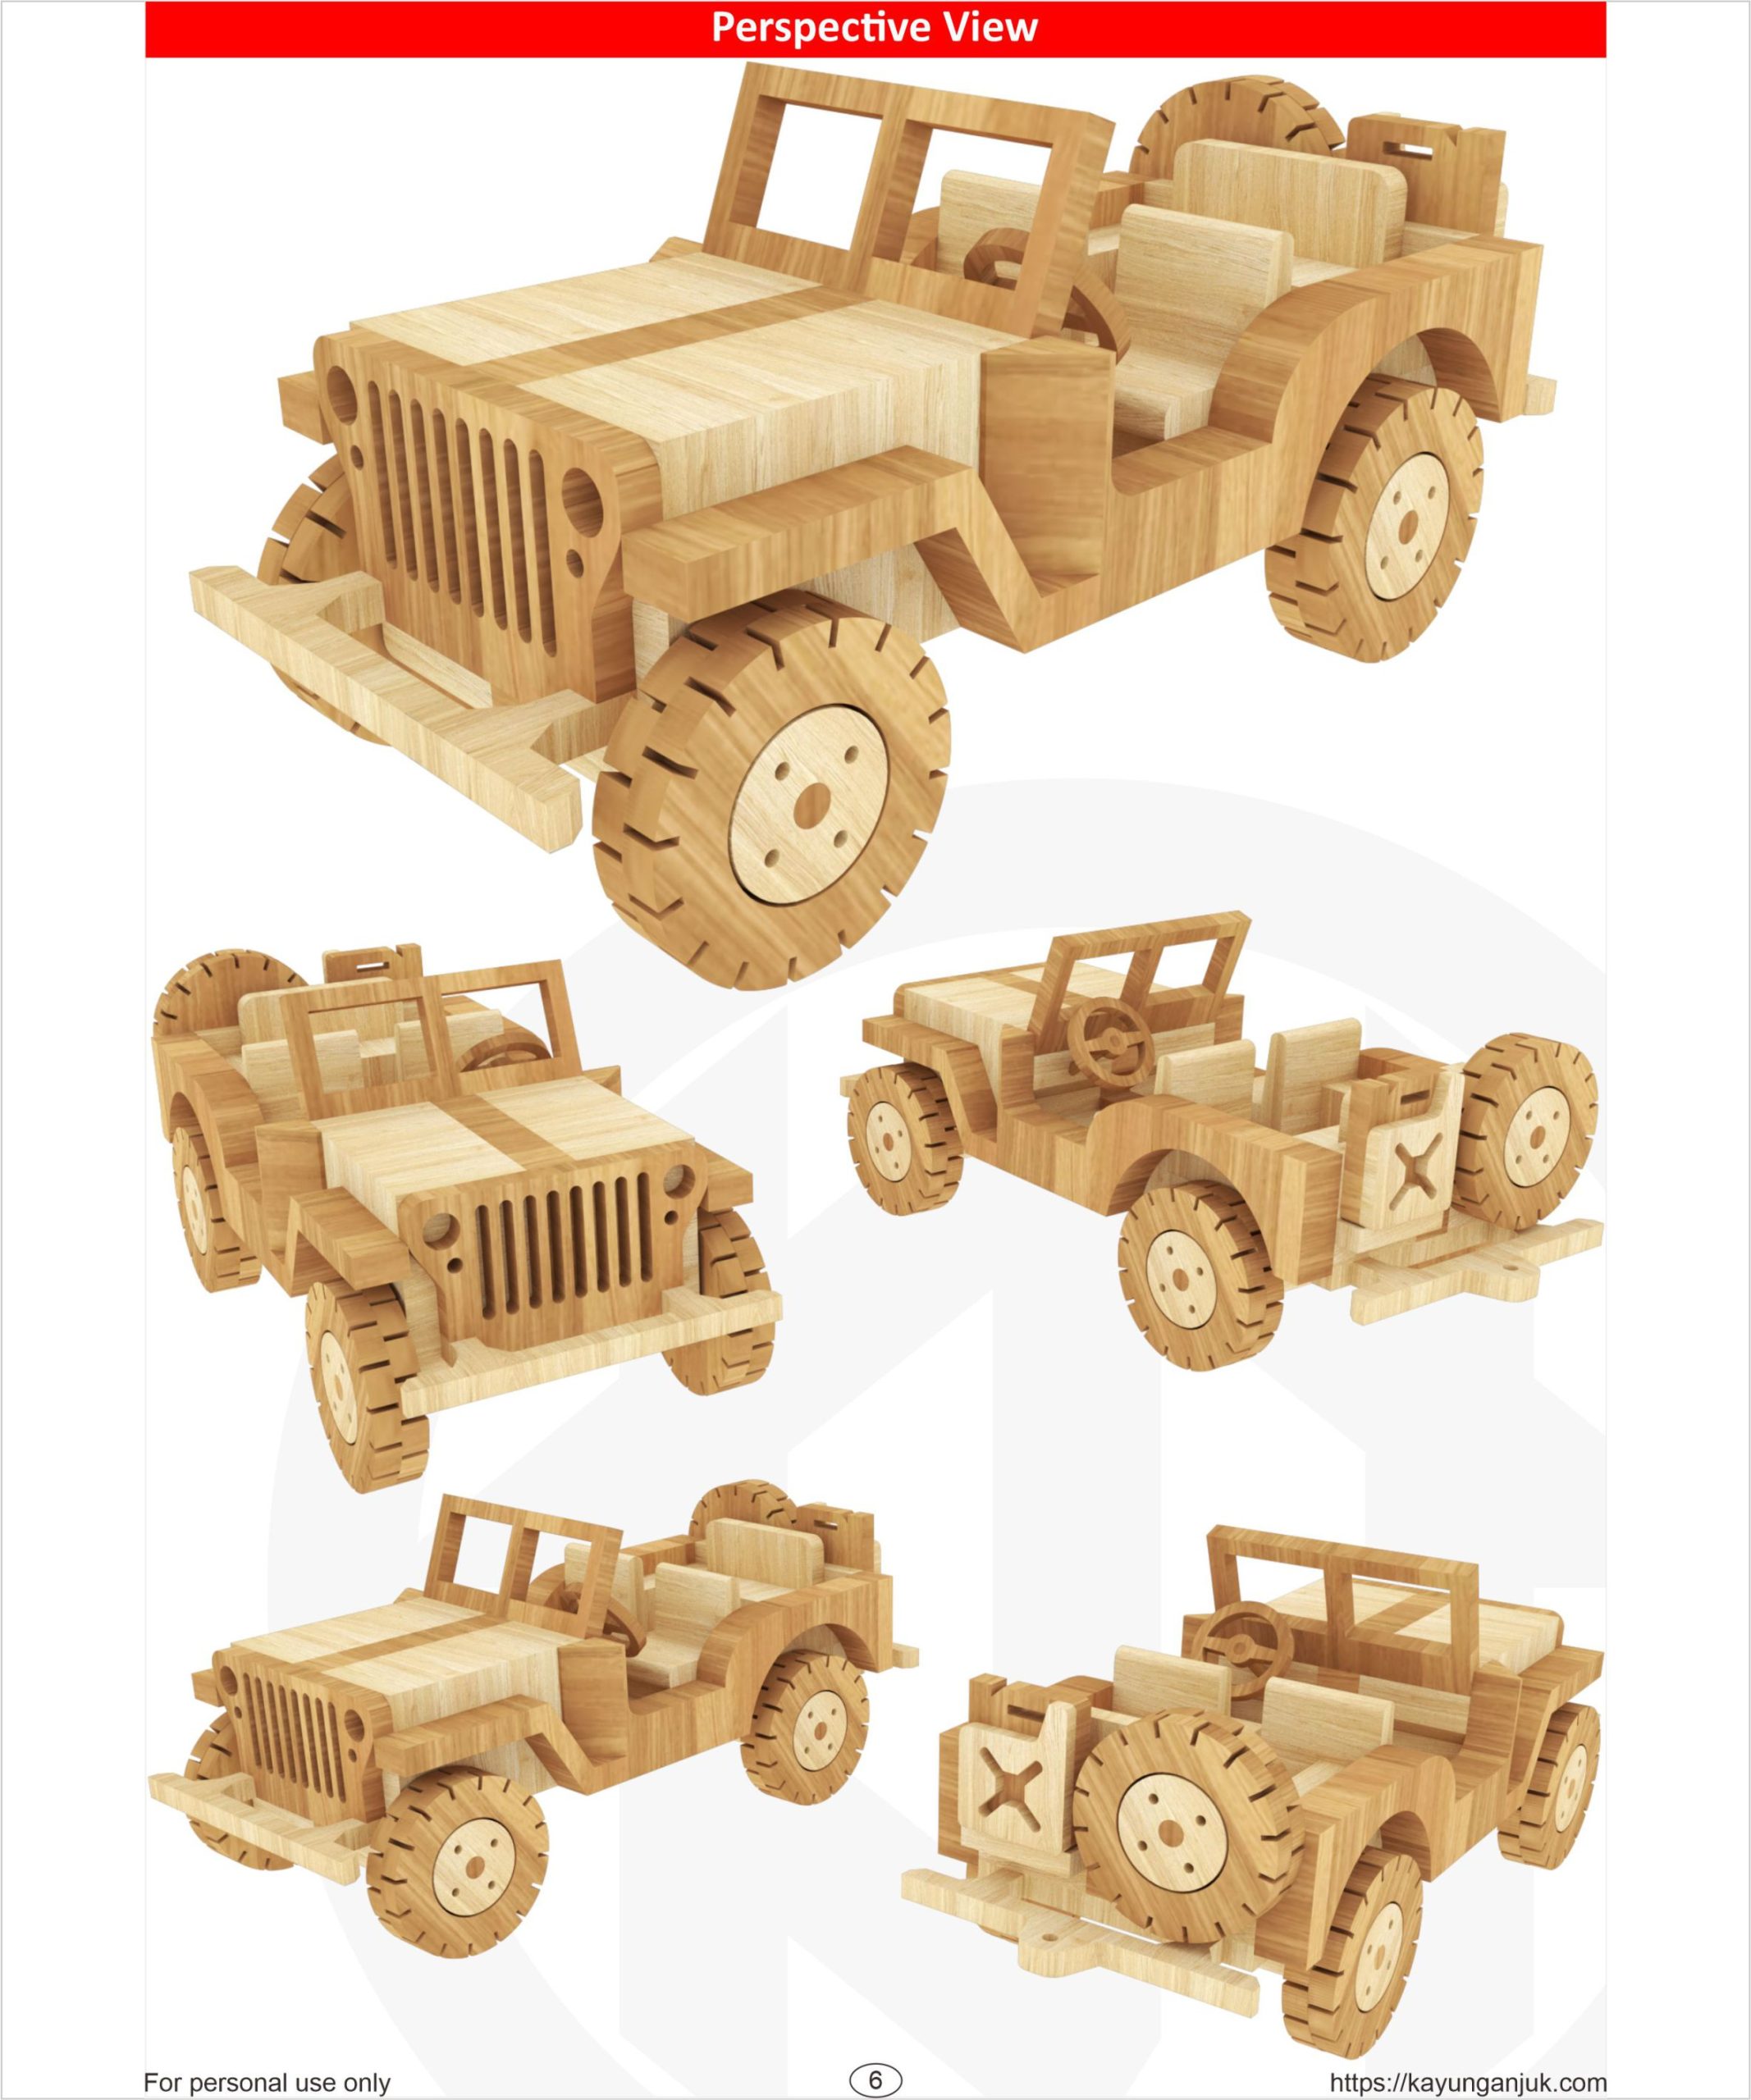 Jeep S Wooden Toy Plans